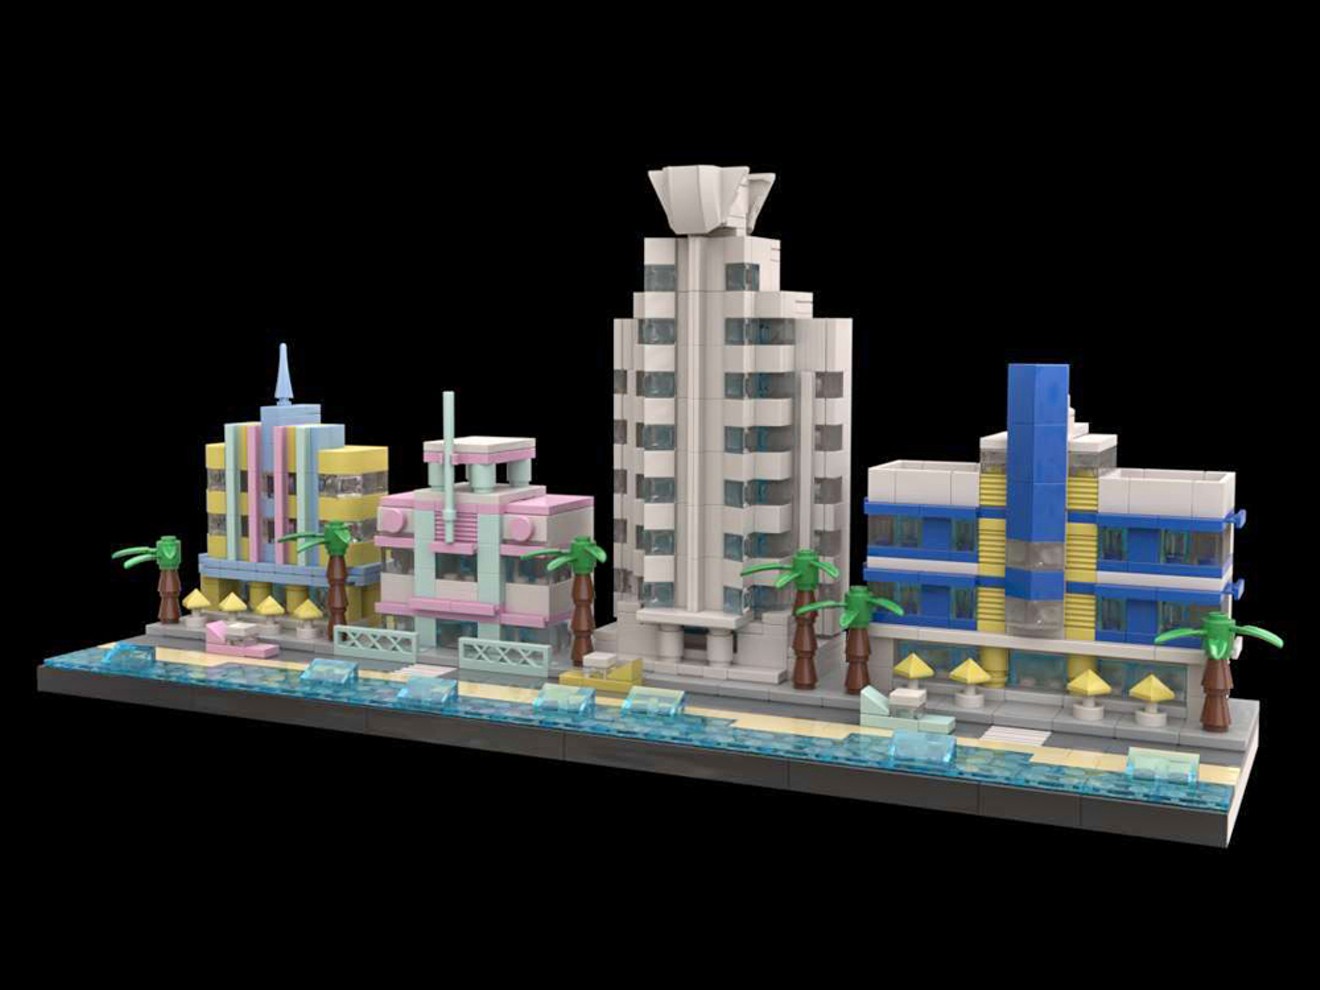 Architect Keith Olsen created a Lego model of South Beach that includes the Marlin Hotel (left), Hilton Grand Vacations at McAlpin-Ocean Plaza, Delano South Beach, and Hotel Breakwater South Beach.